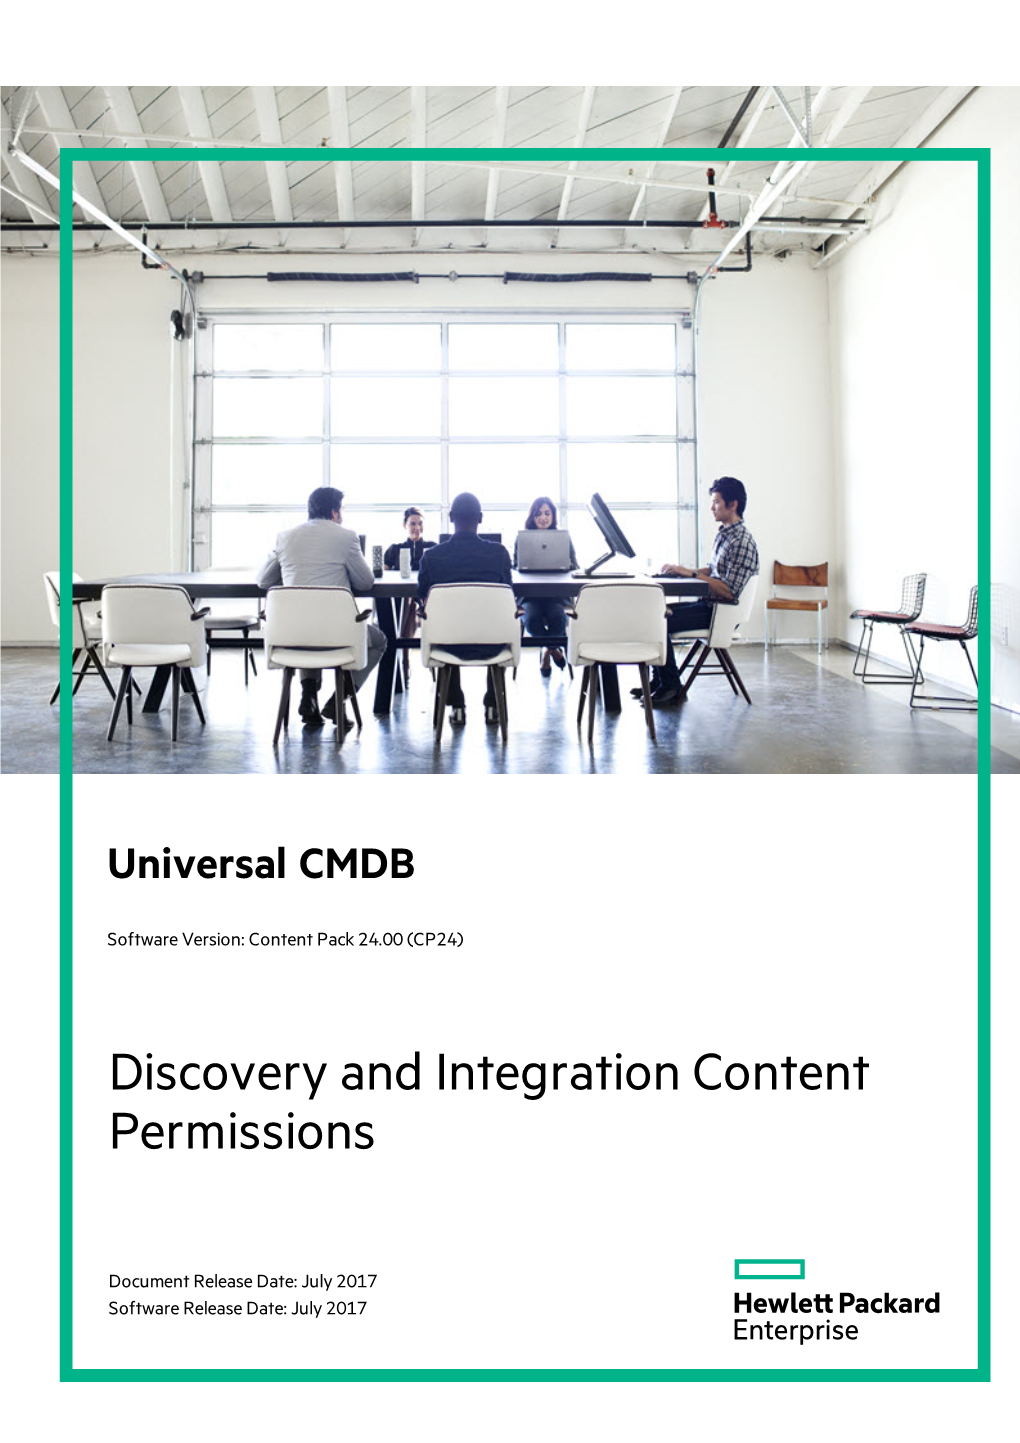 Discovery and Integration Content Permissions